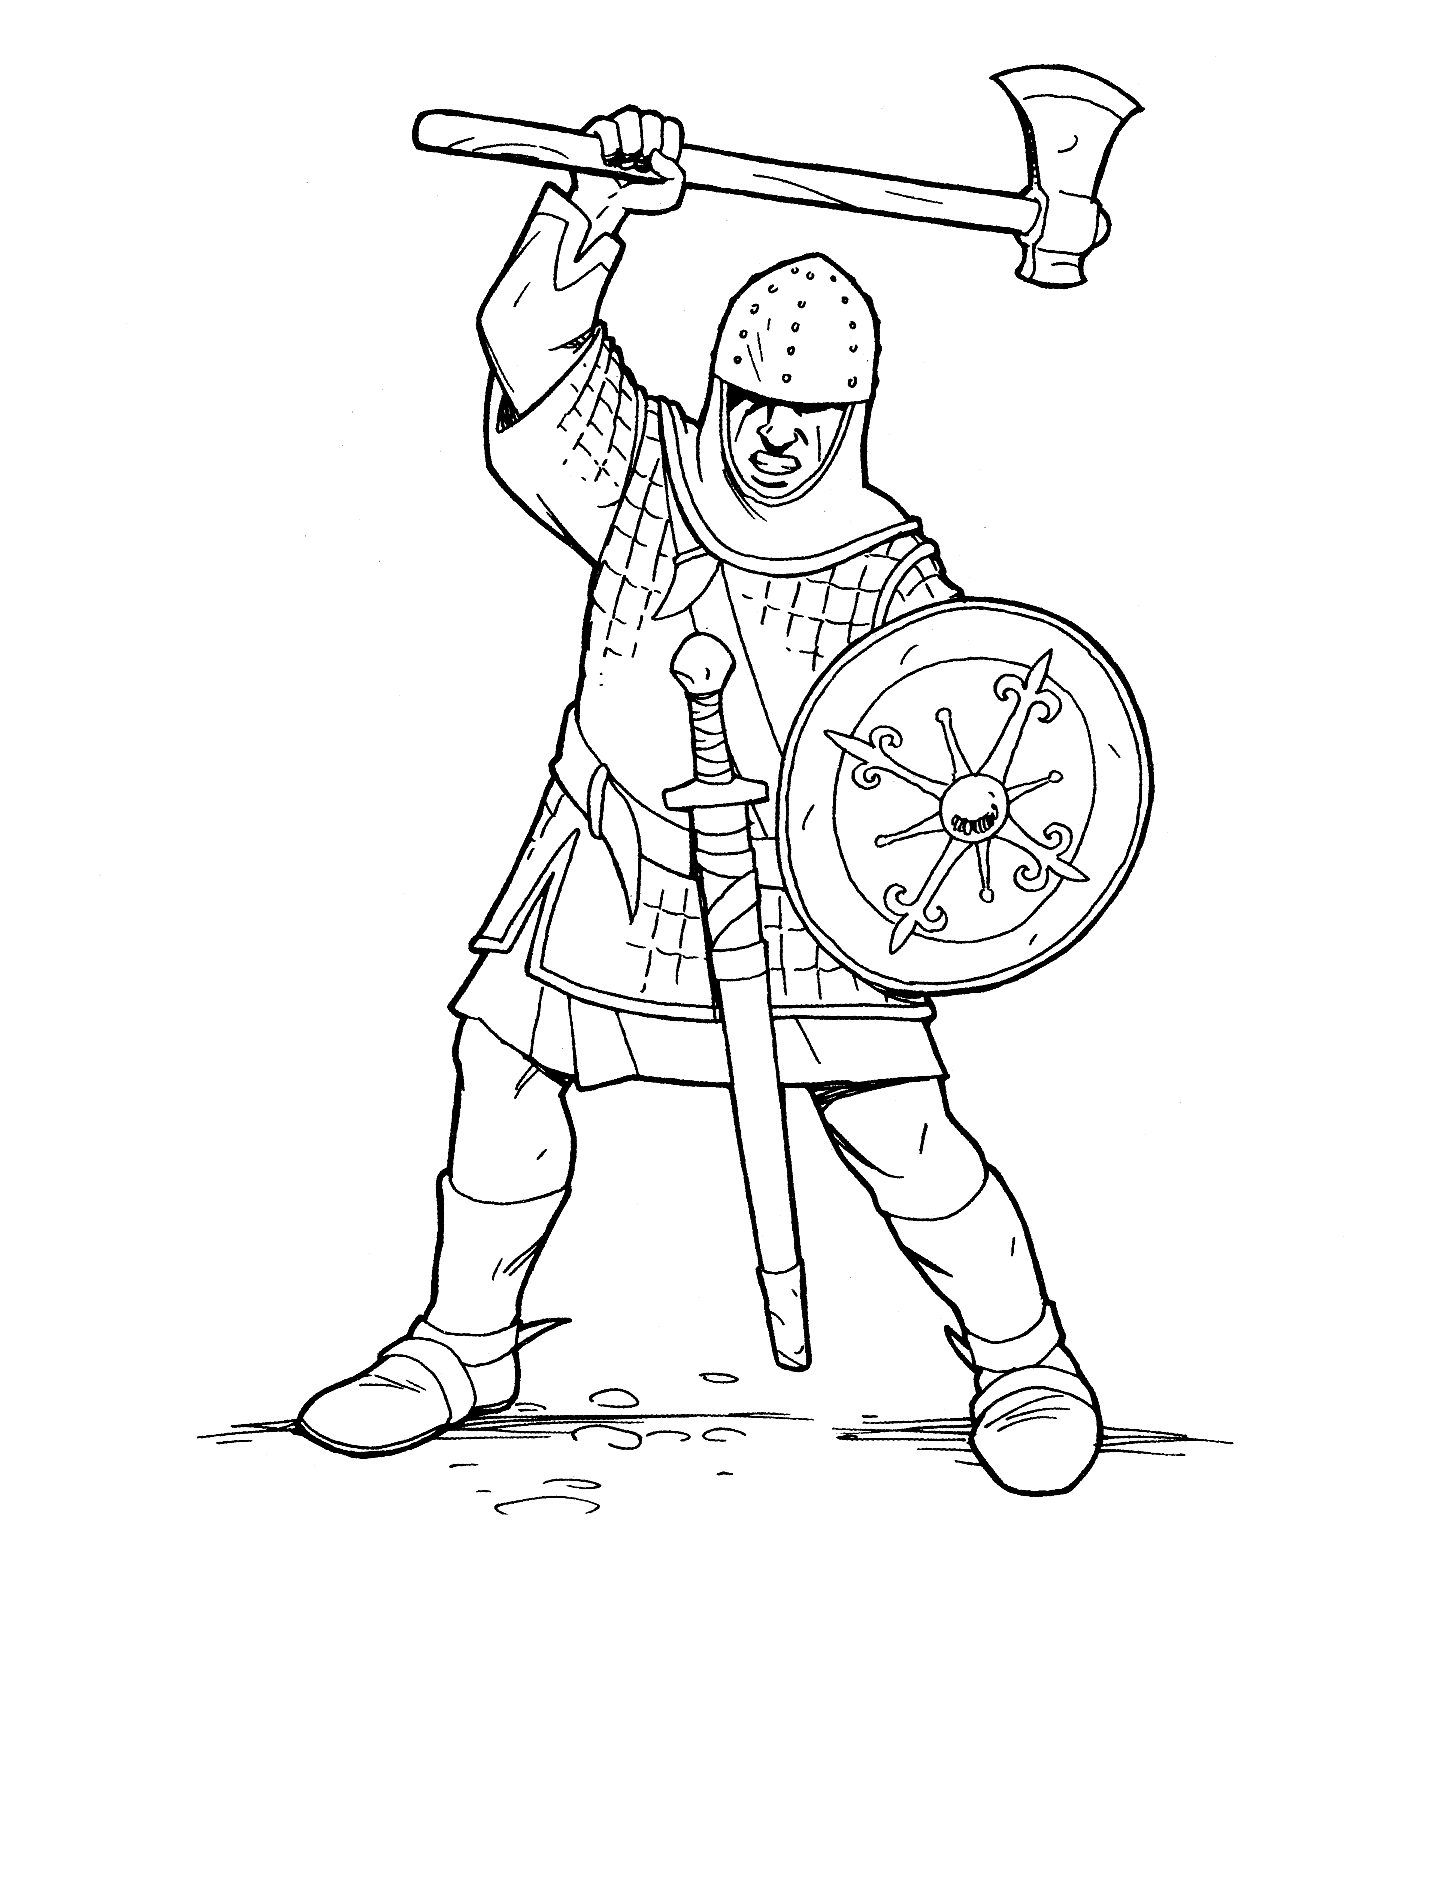 knight coloring page knights coloring pages coloringpages1001com coloring knight page 